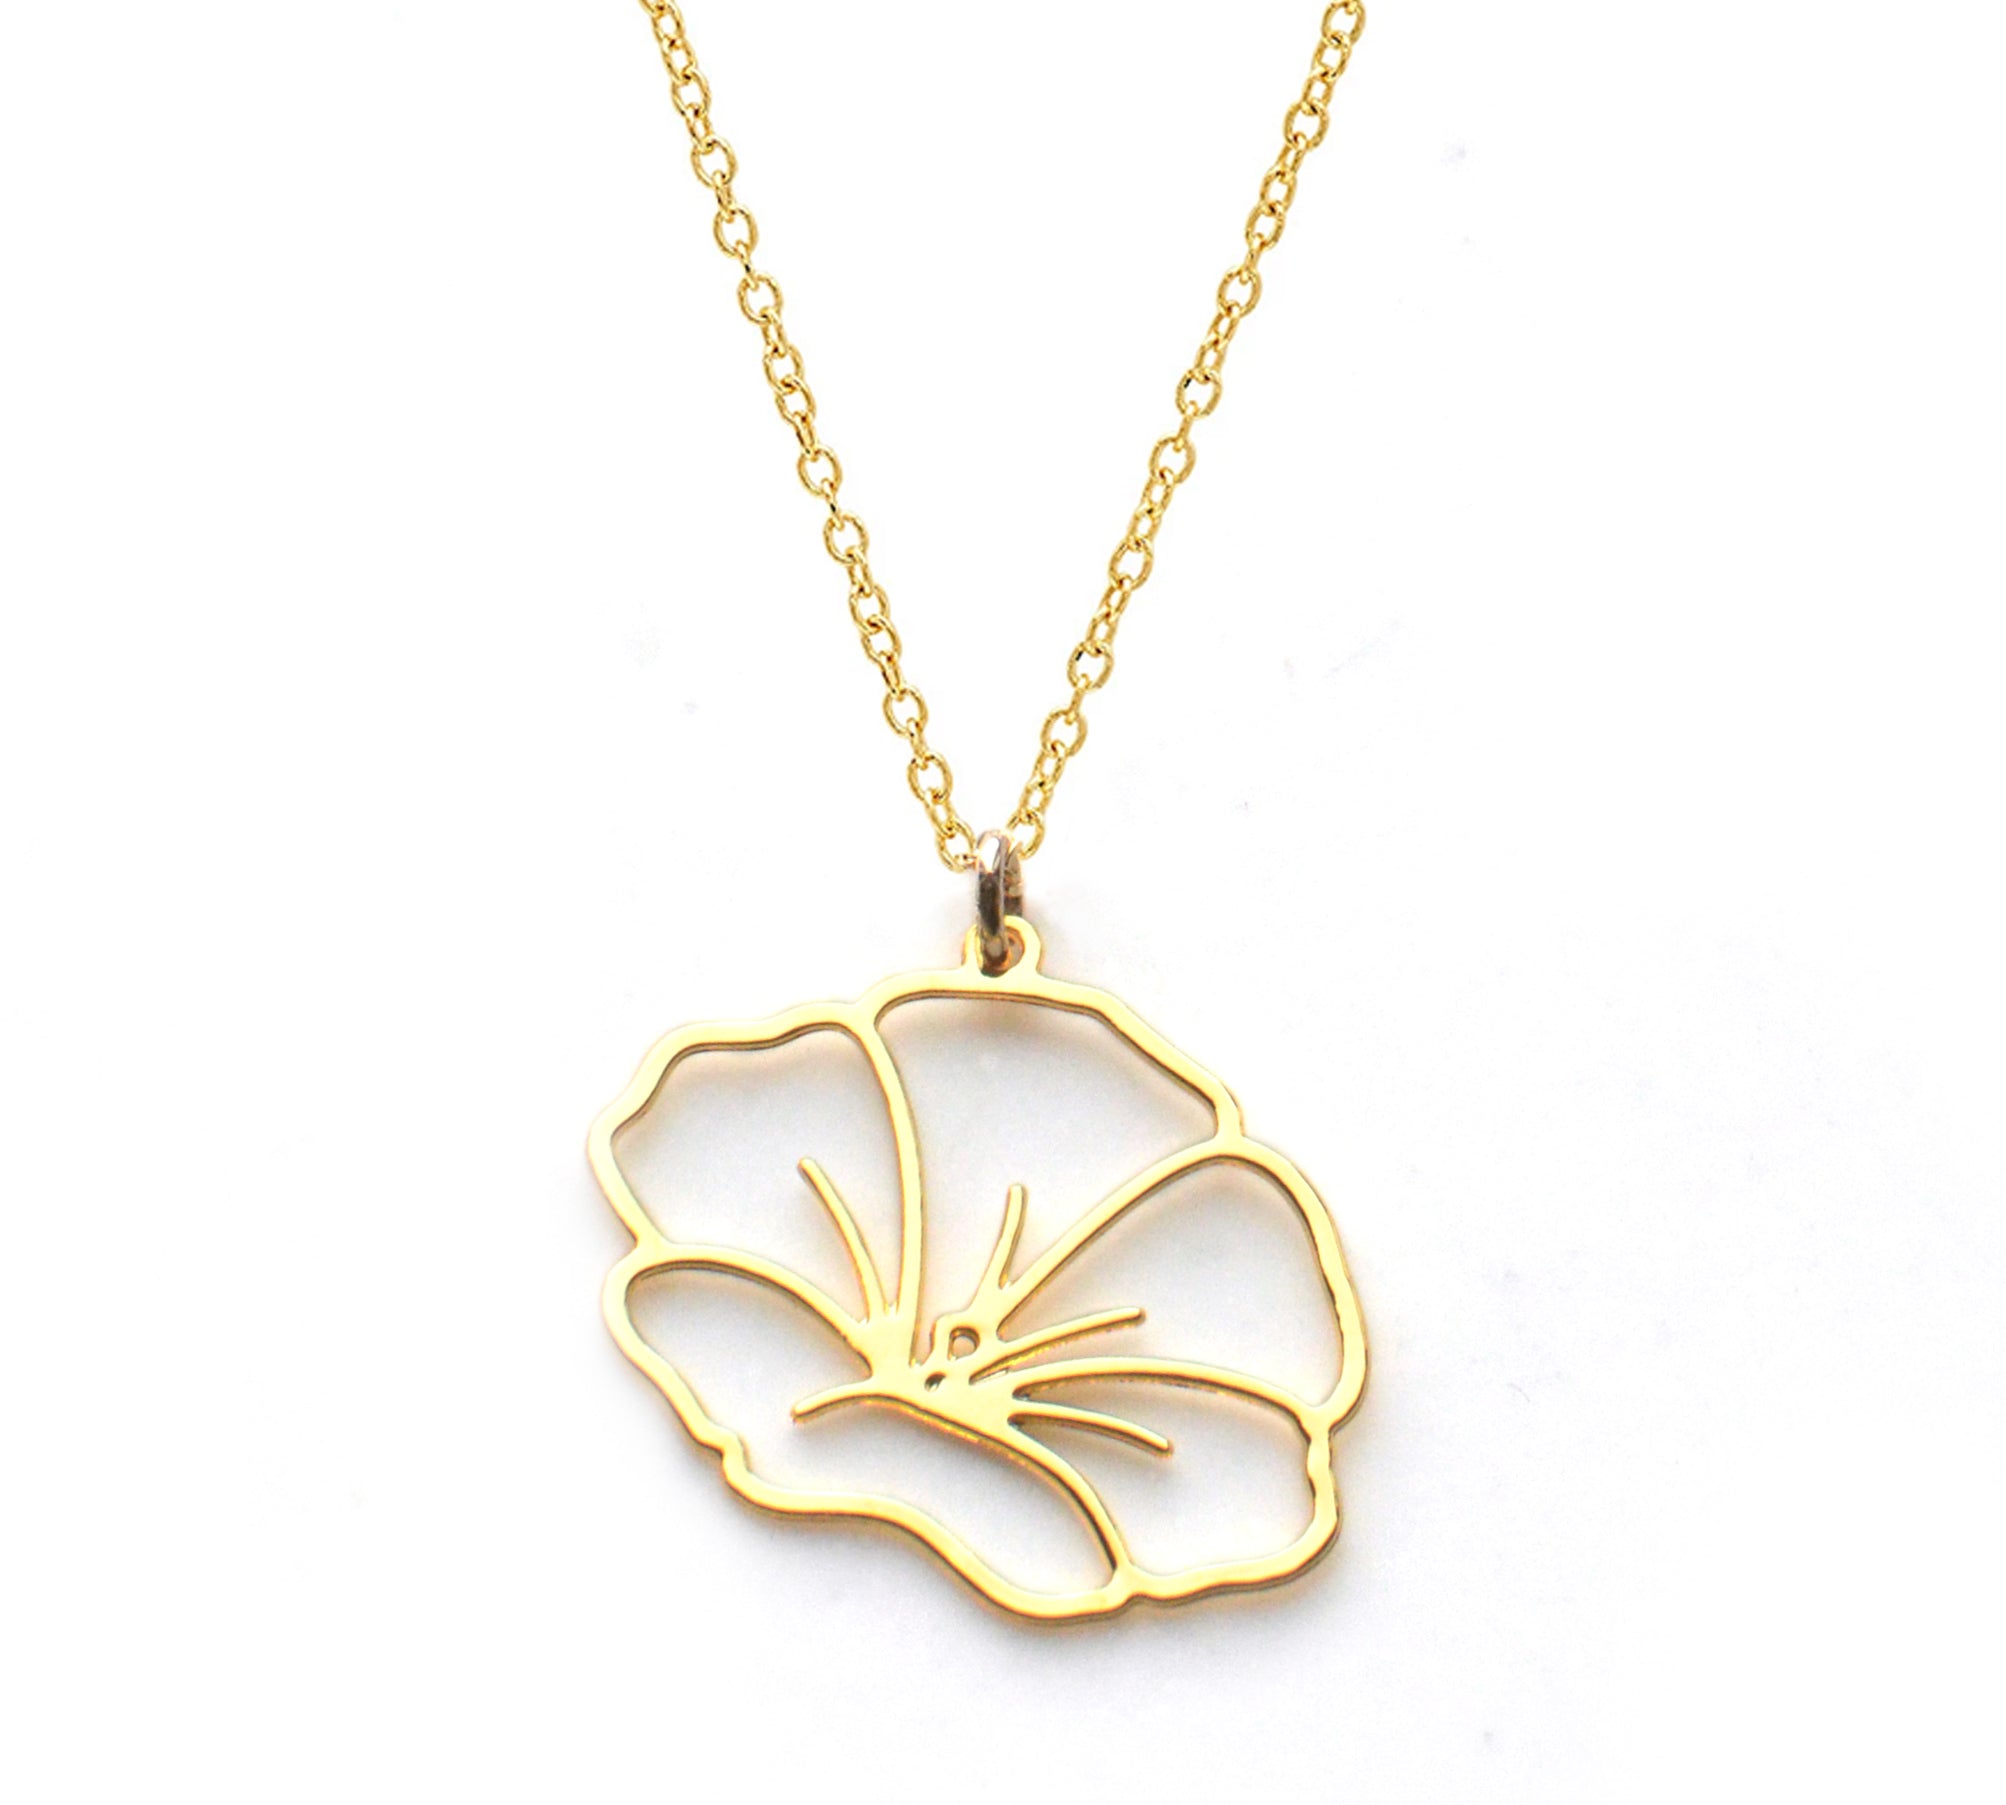 Morning Glory Necklace - High Quality, Affordable, Whimsical, Hand Drawn Necklace - September Birthday Gift - Available in Gold and Silver - Made in USA - Brevity Jewelry